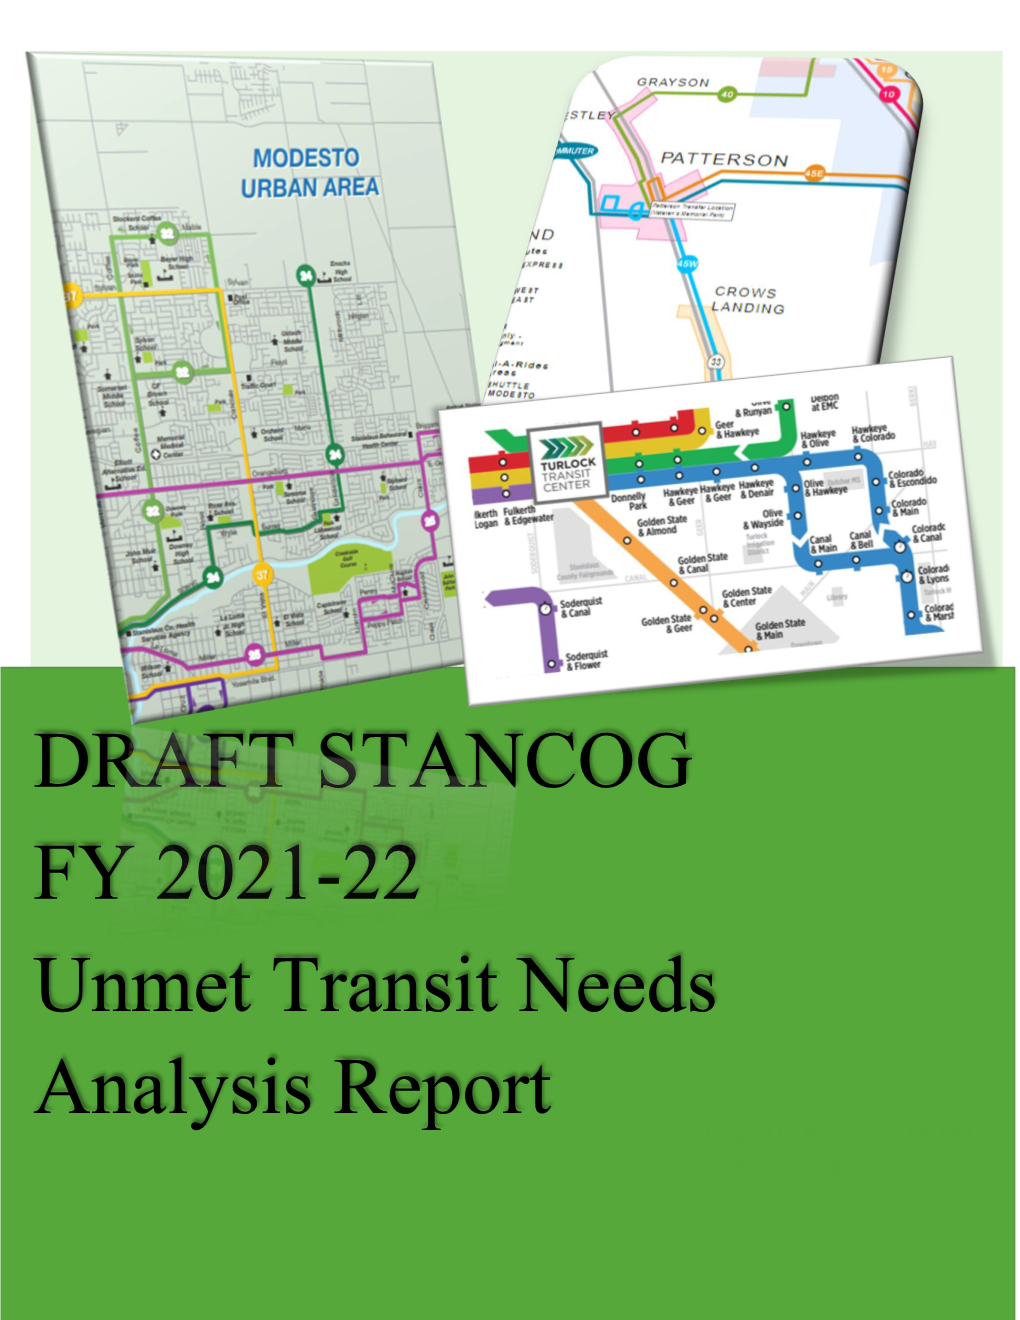 Draft FY 2021/22 Unmet Transit Needs Identification and Analysis Report and Finding That There Are No Unmet Transit Needs That Are Reasonable to Meet for FY 2021/22